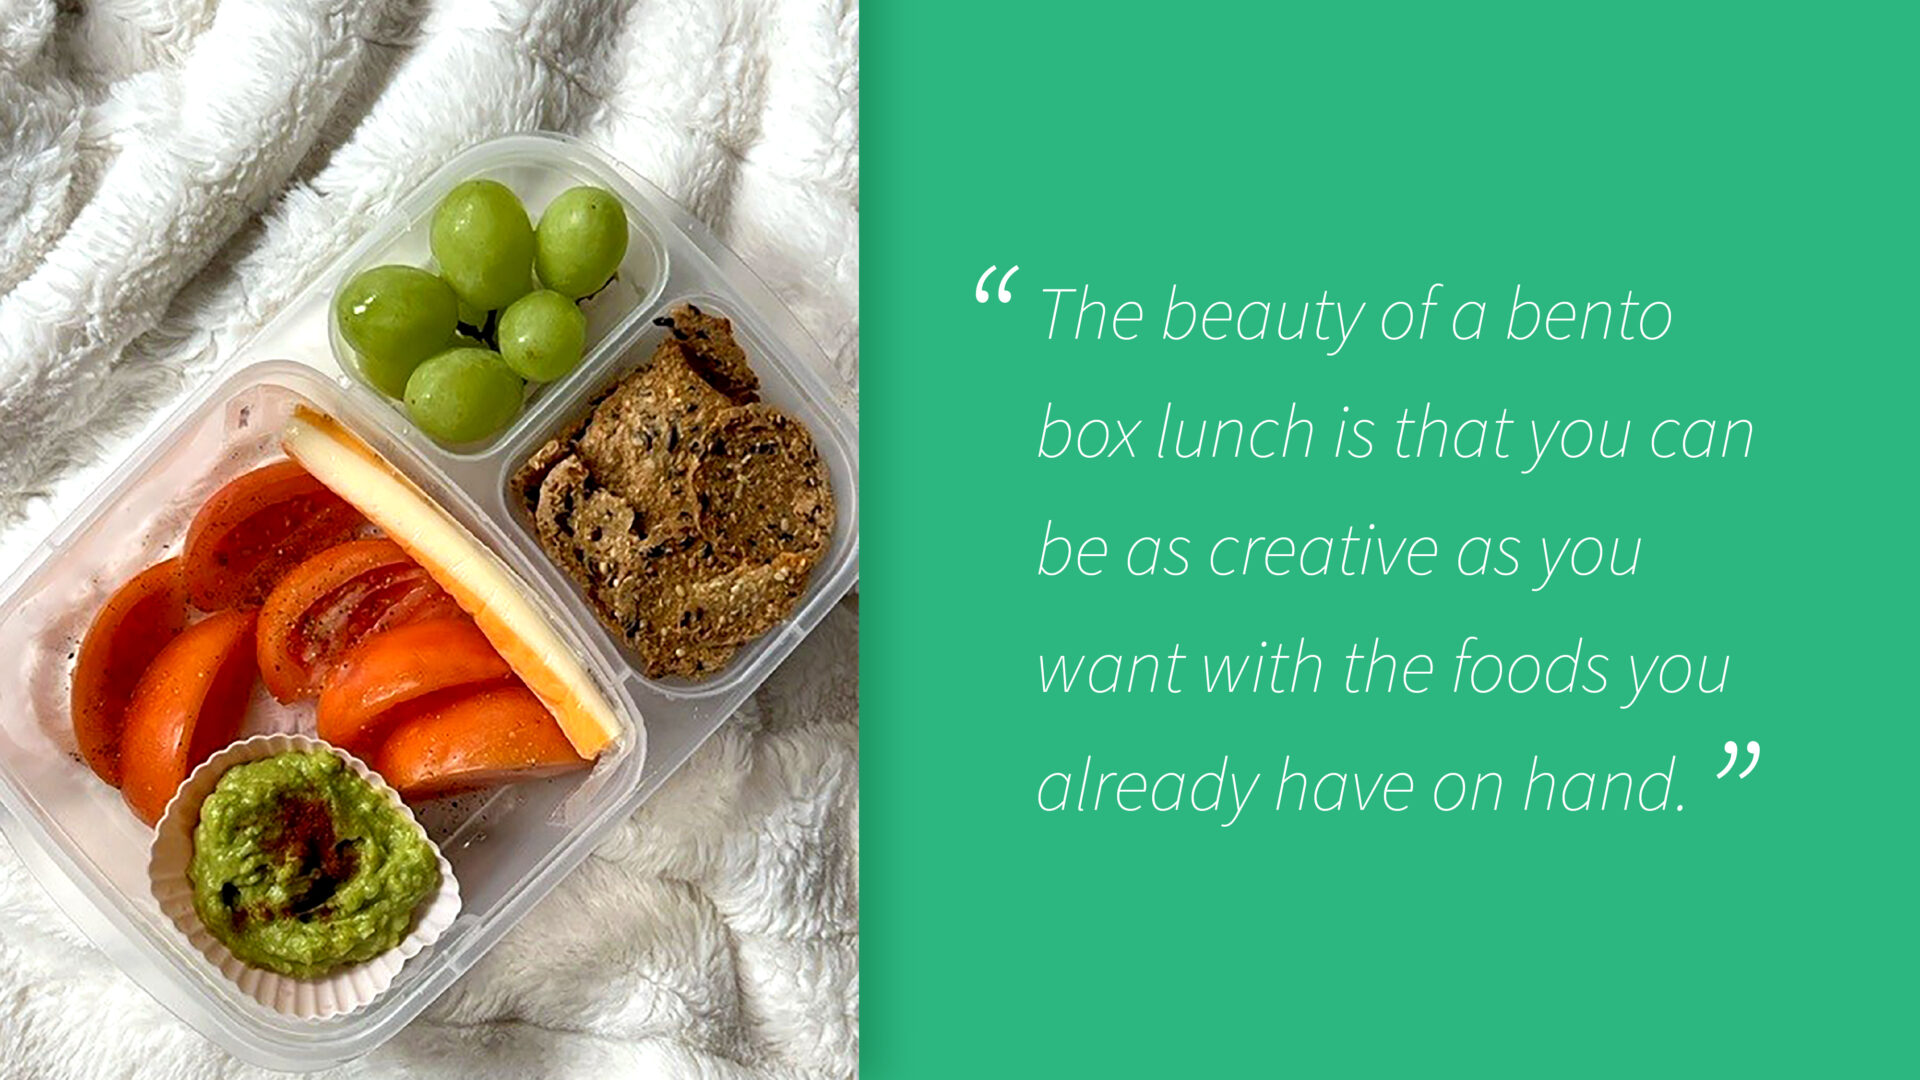 graphic image of a bento box curated by rebecca liang, oak valley heath's registered dietitian